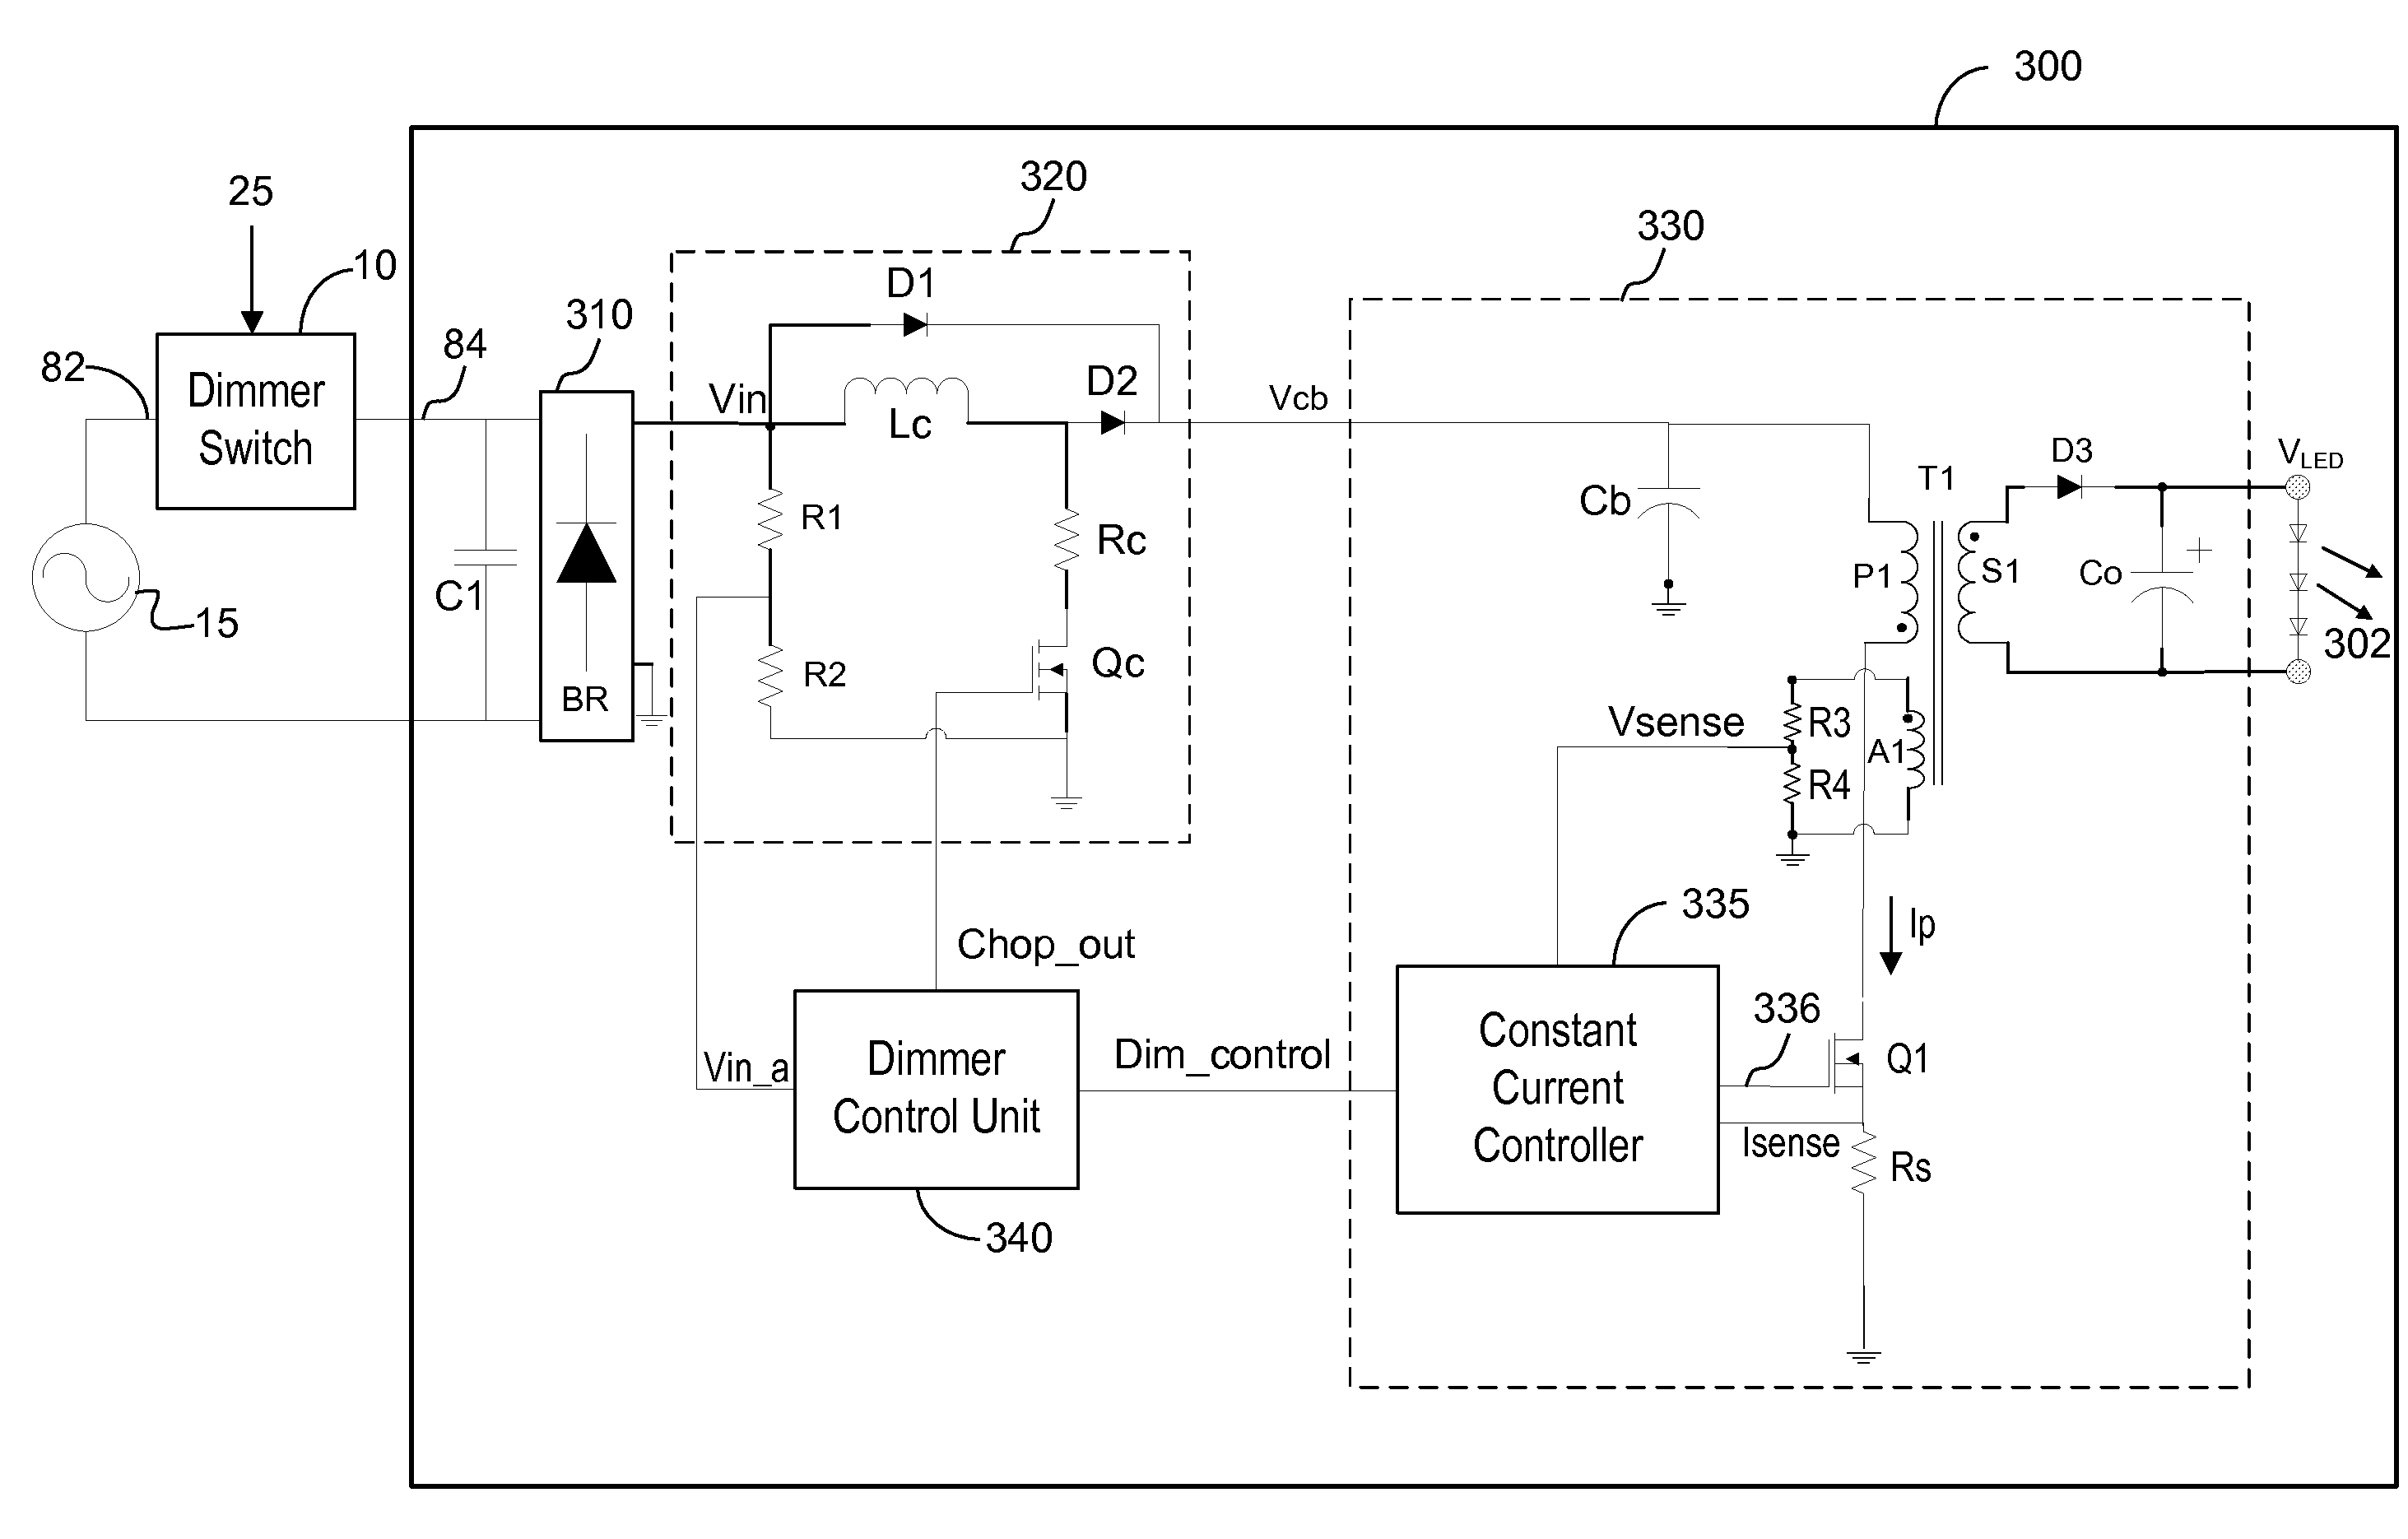 Adaptive dimmer detection and control for LED lamp